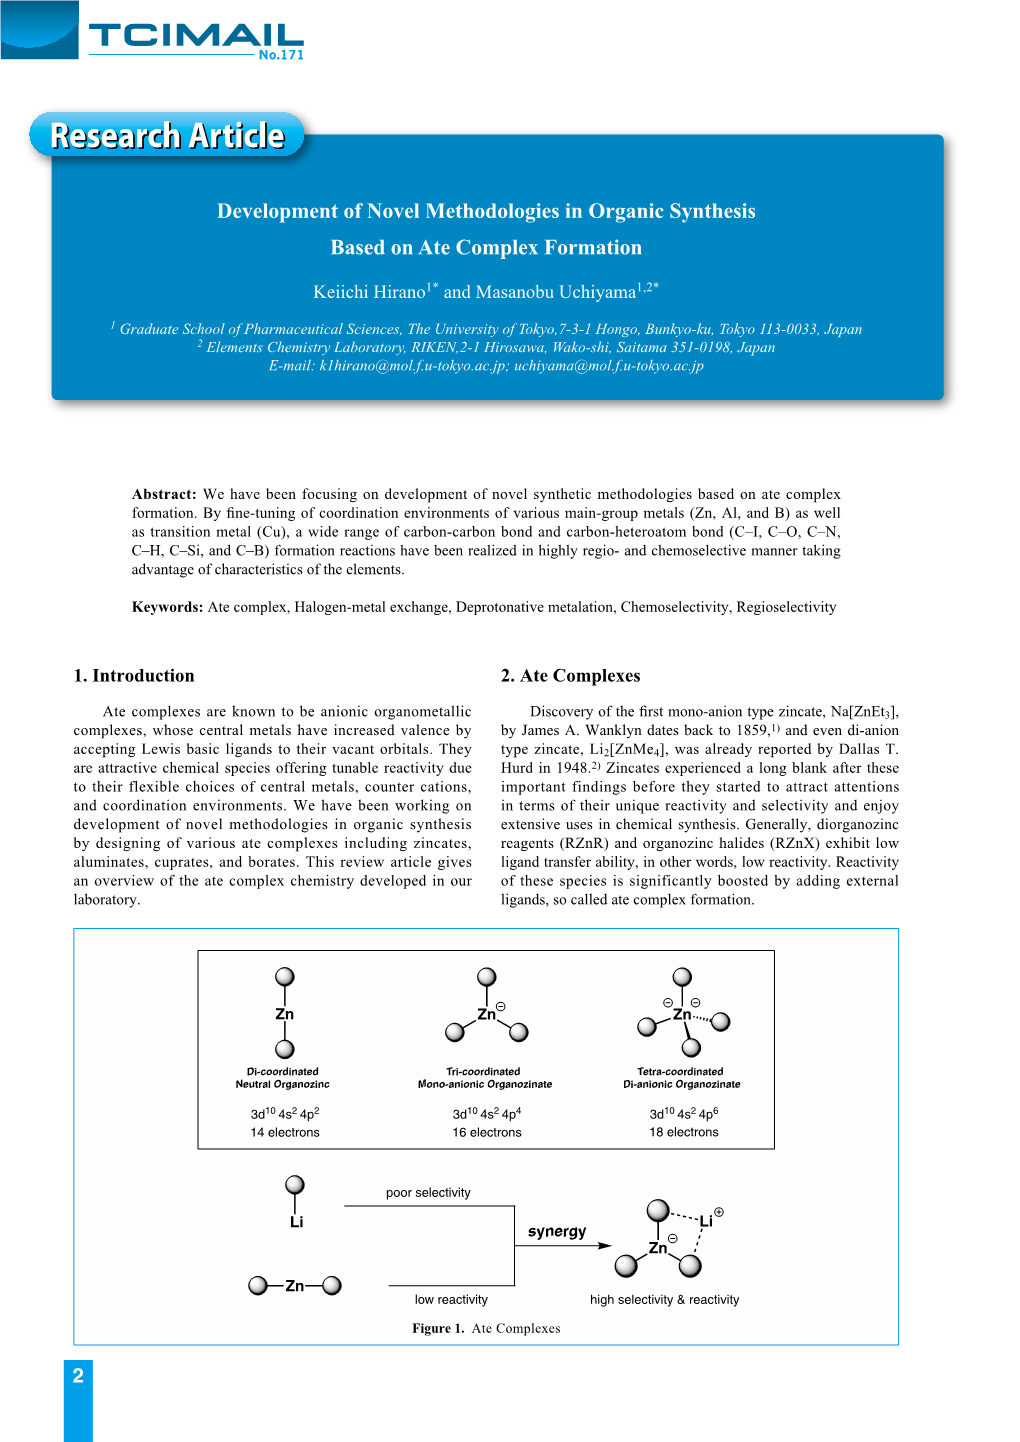 Development of Novel Methodologies in Organic Synthesis Based on Ate Complex Formation